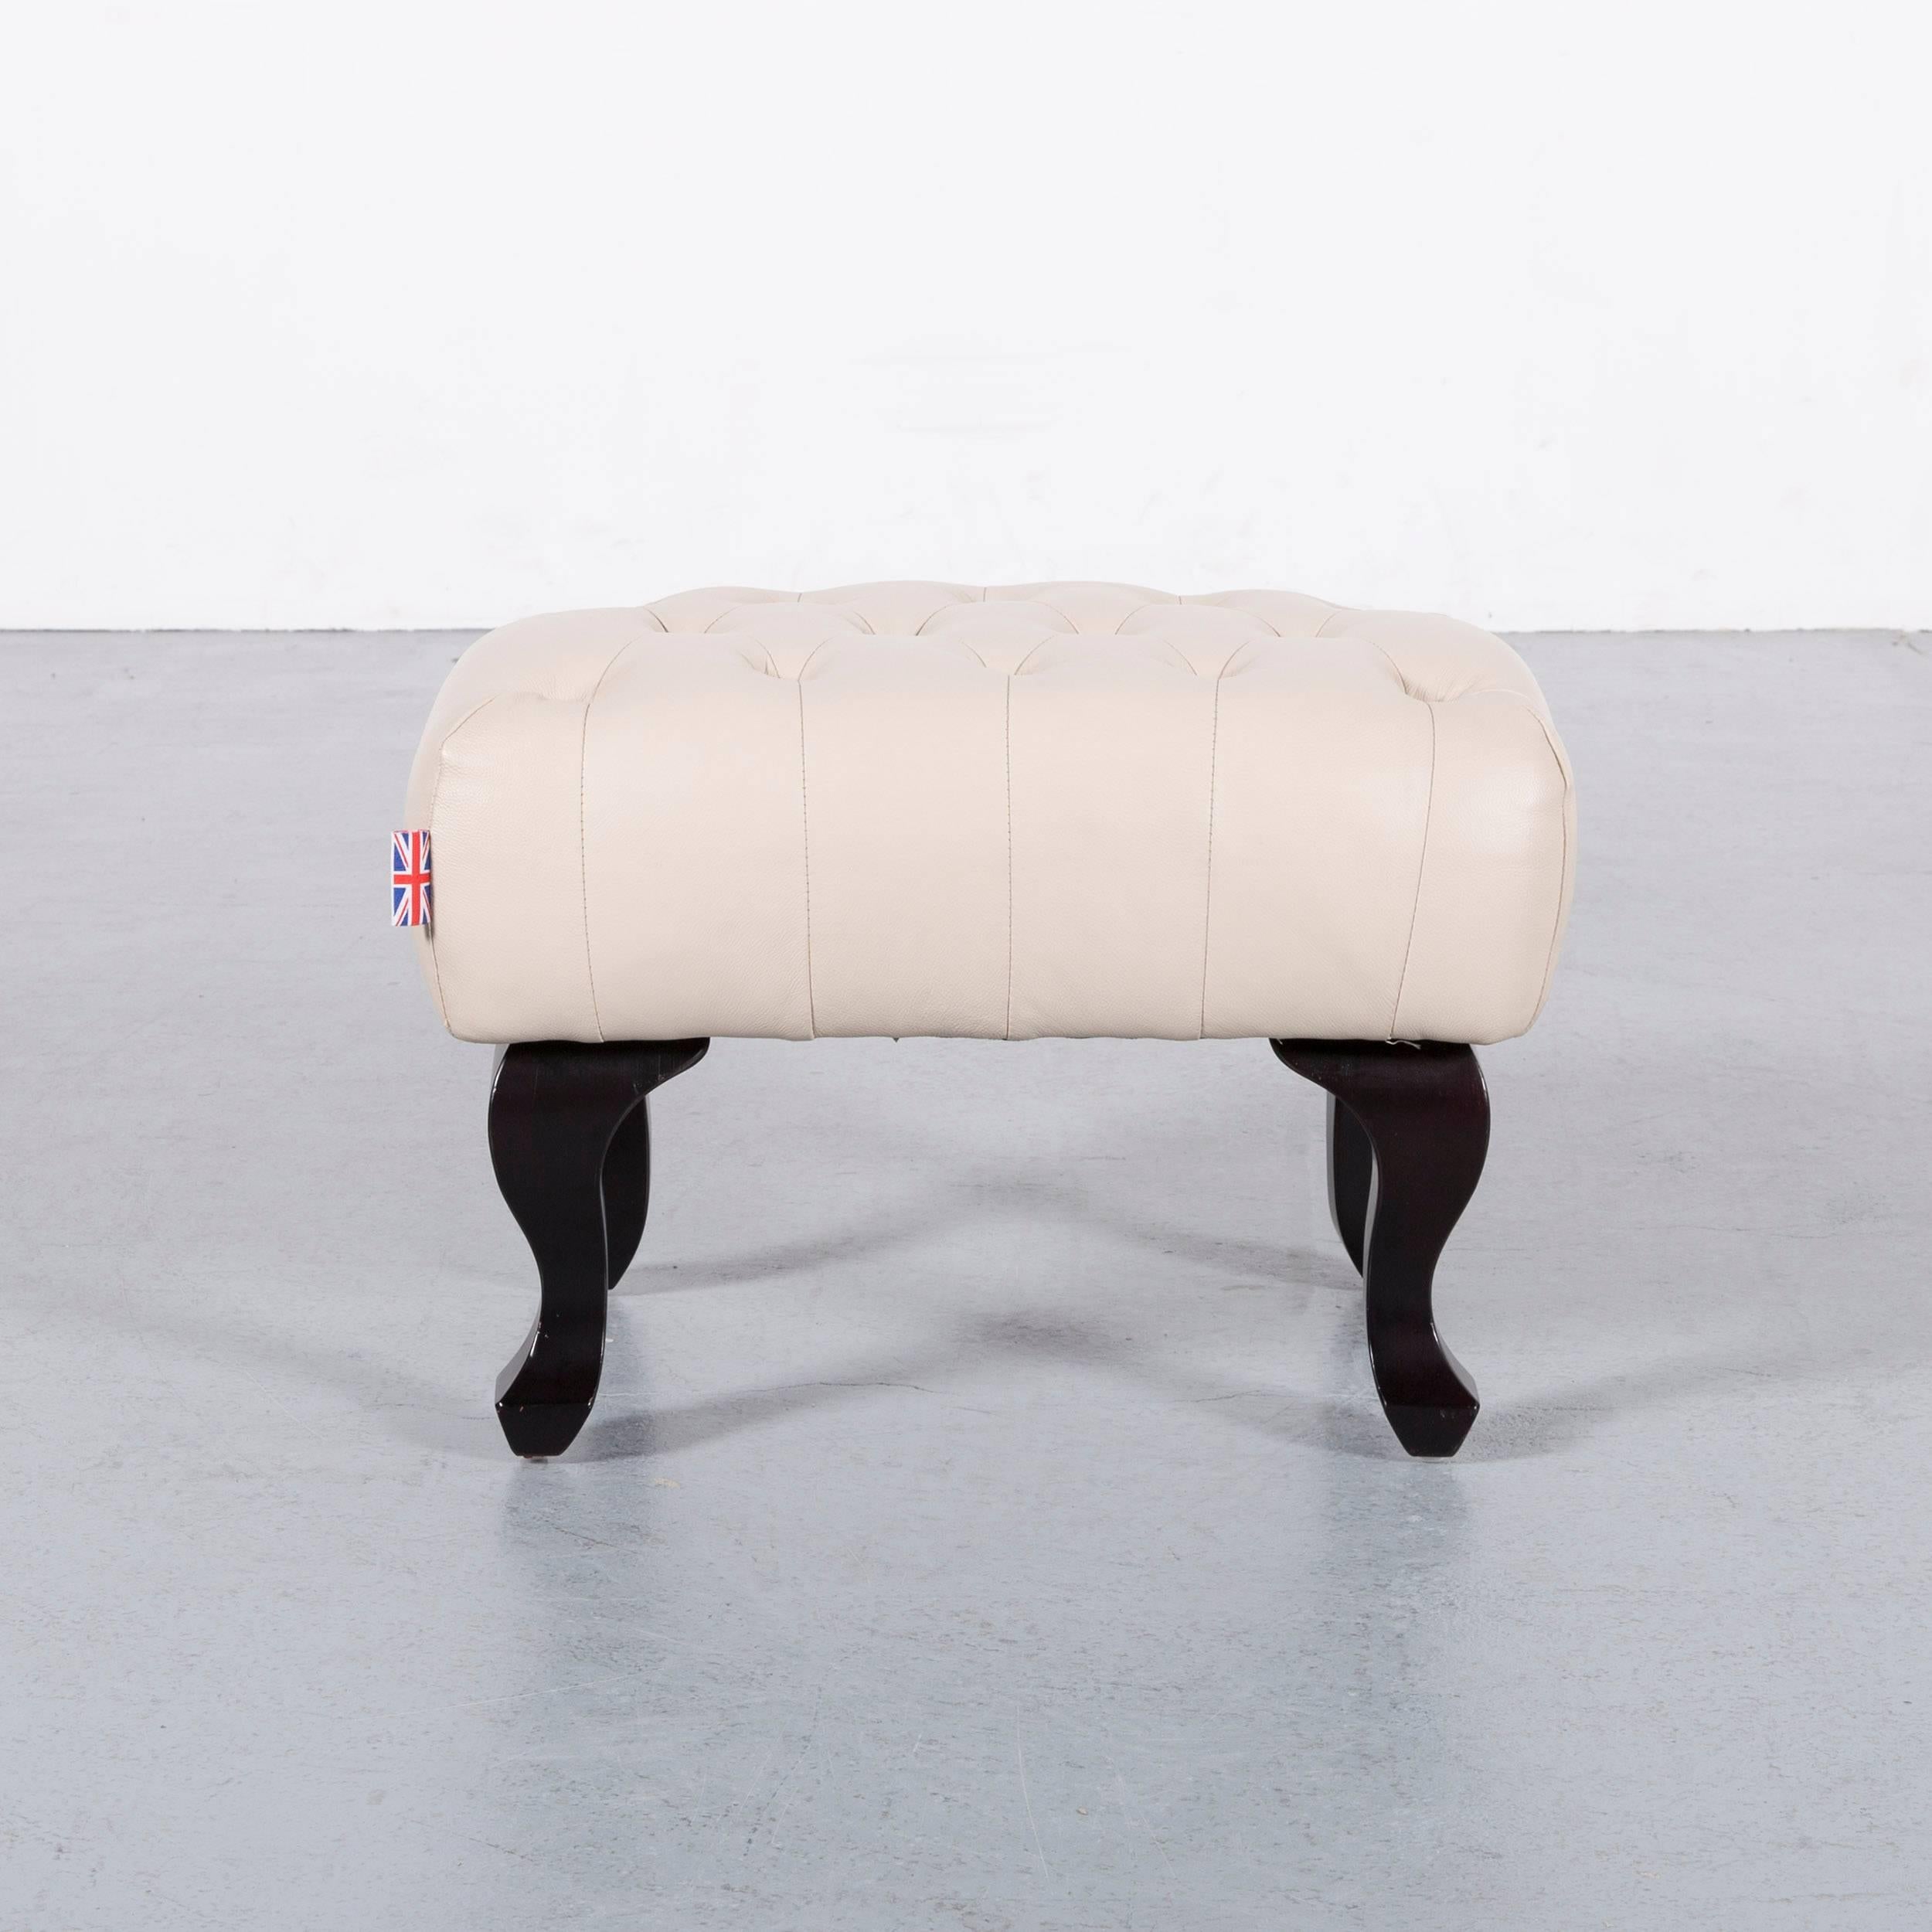 We bring to you an Chesterfield leather foot-stool off-white bench.

































